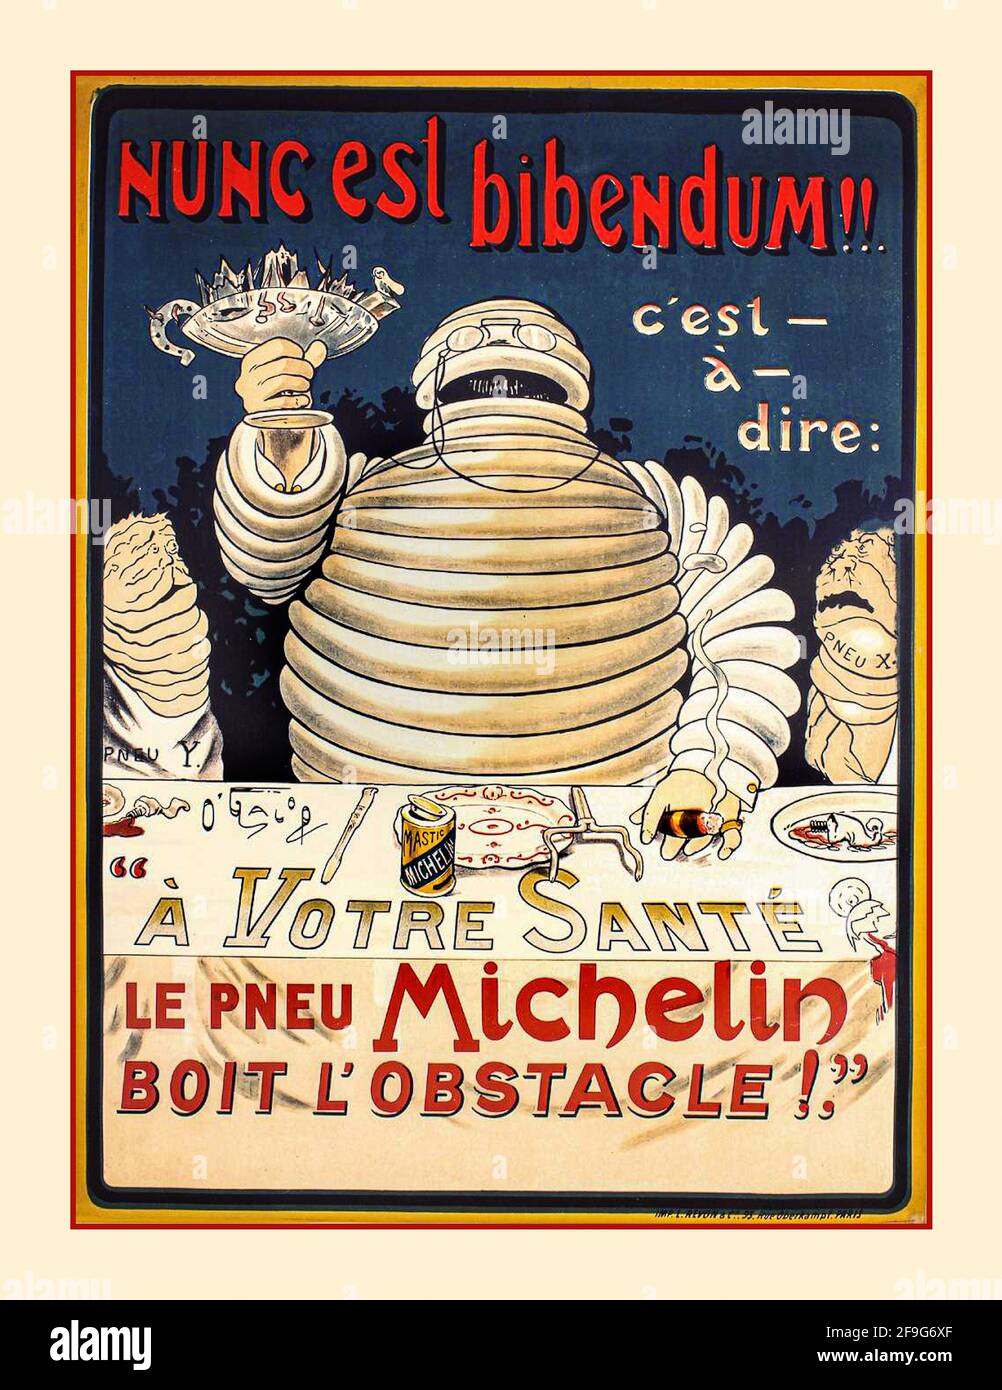 BIBENDUM MICHELIN 1900's Michelin Advertisement Tyres for Automobile Tyres featuring the Bibendum man an icon used in early Michelin poster advertising Stock Photo